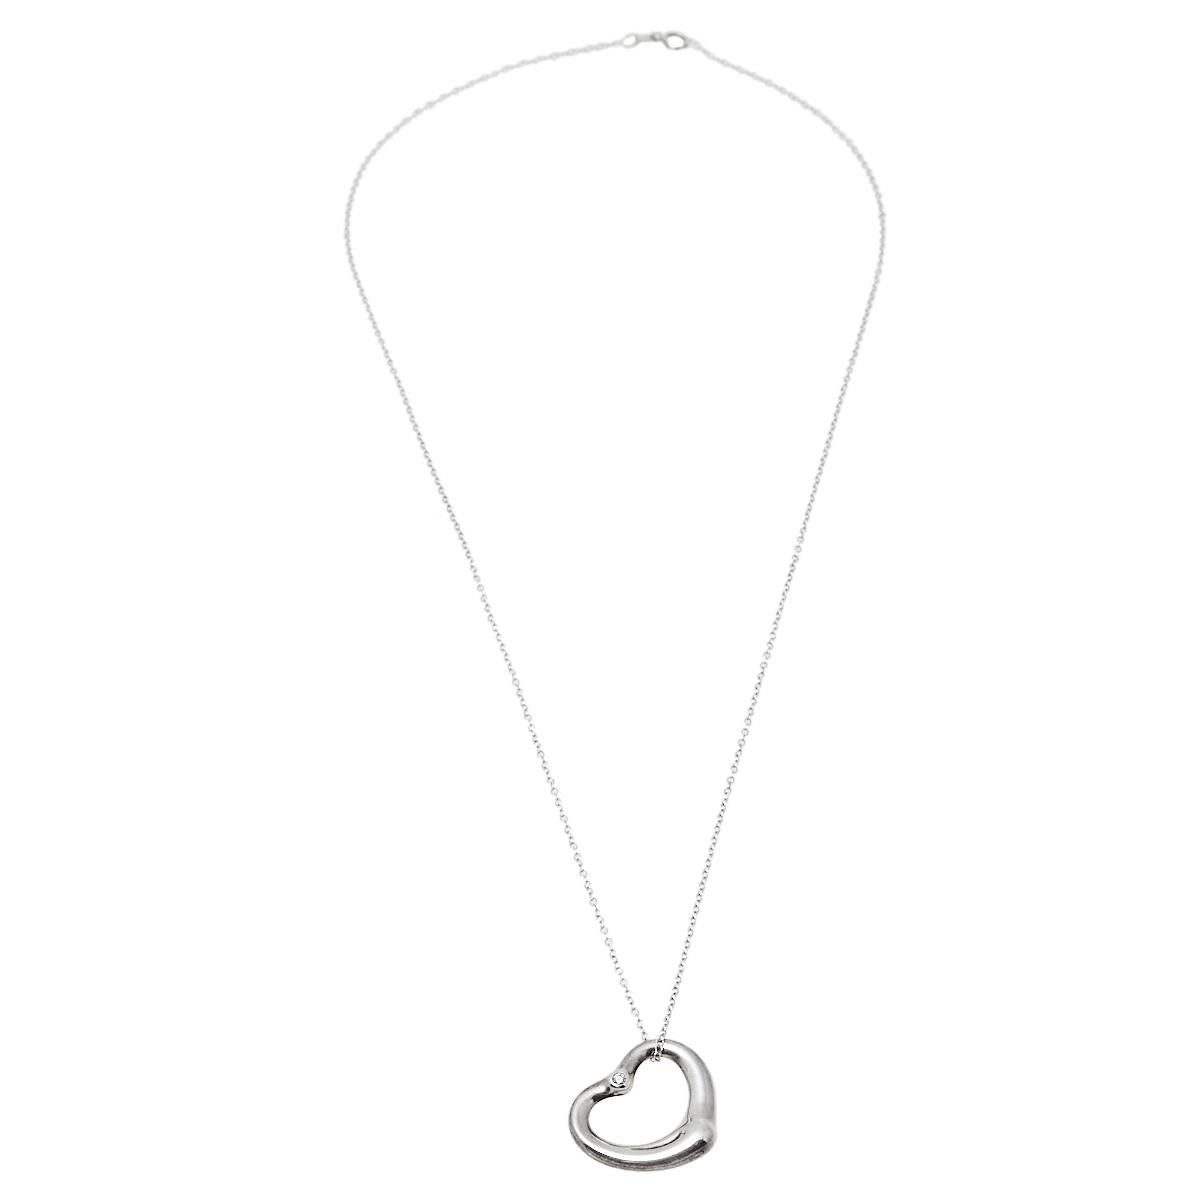 This beauty from Tiffany & Co. is exquisite and perfectly designed to last! Beautifully crafted from sterling silver, this piece is a stunner. It has been gloriously styled with an open heart pendant adorned with a diamond and is strung on a slender